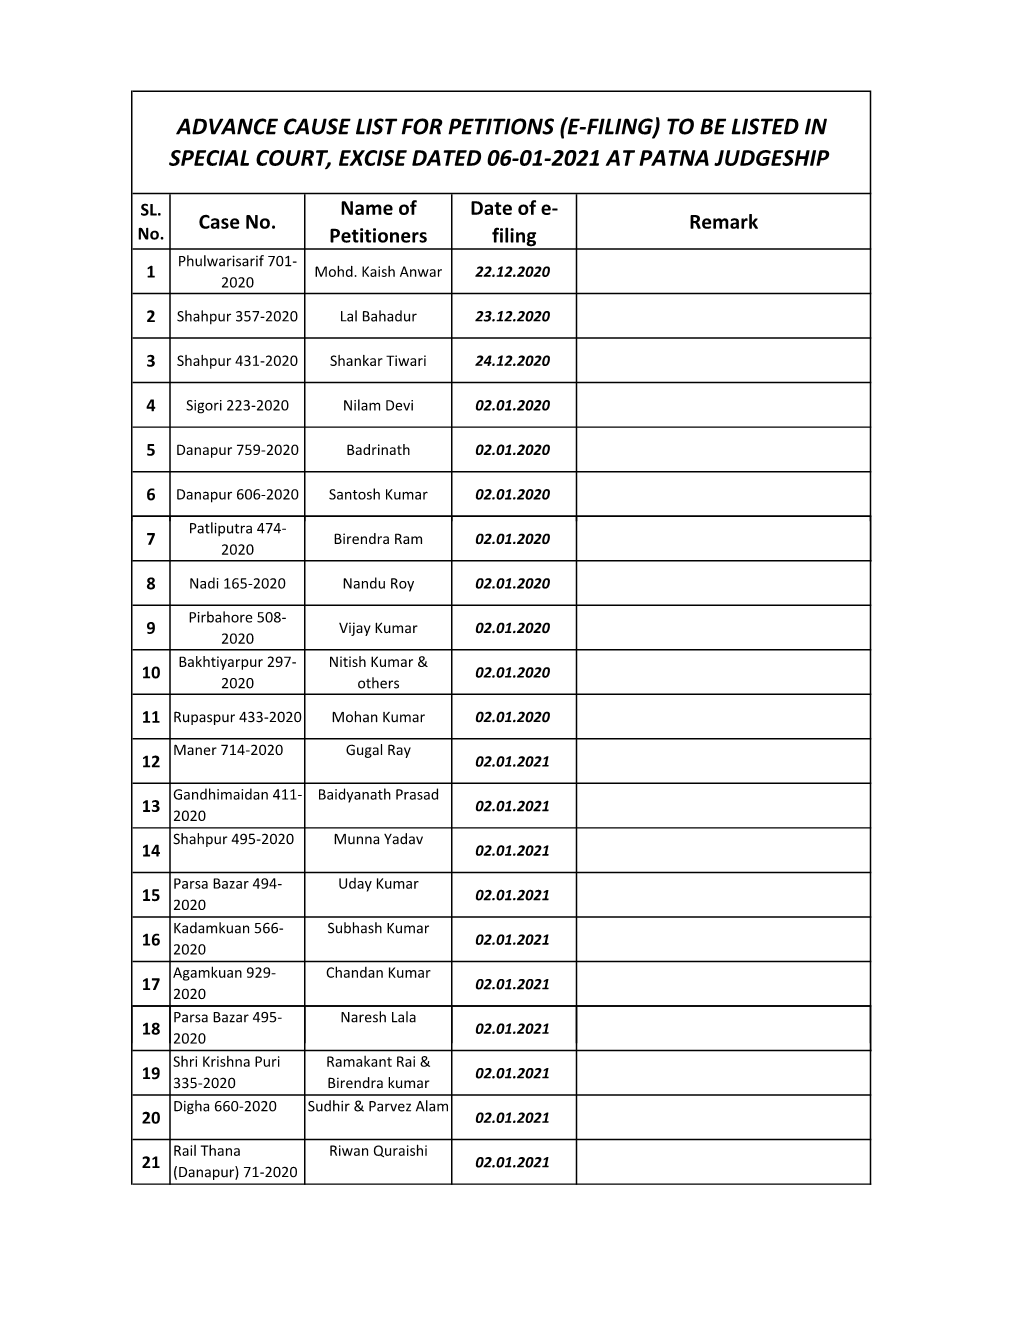 Advance Cause List for Petitions (E-Filing) to Be Listed in Special Court, Excise Dated 06-01-2021 at Patna Judgeship